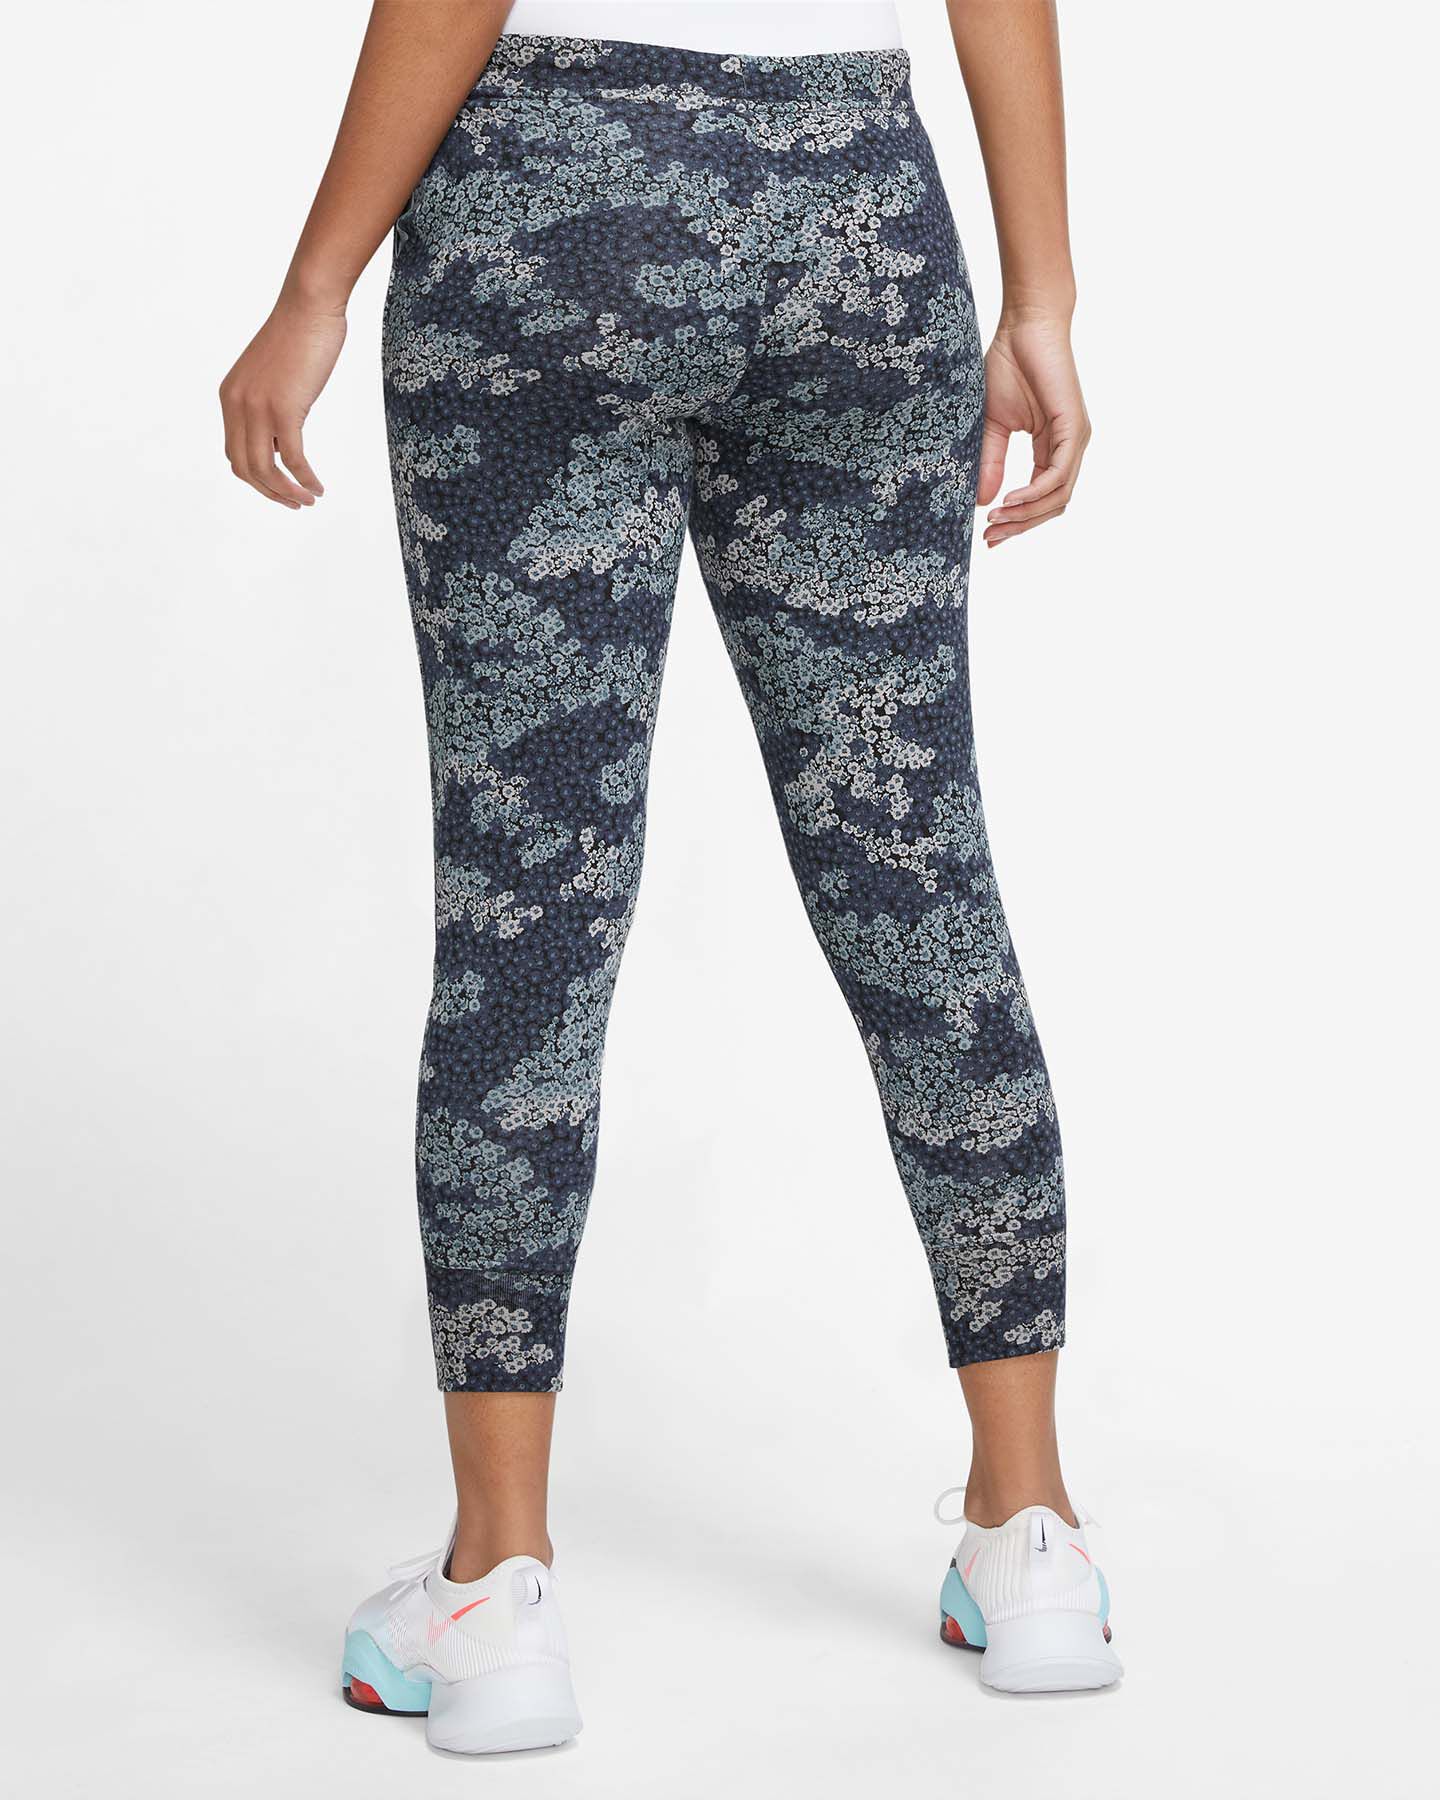  Pantalone training NIKE 7/8 CP AOP FLORAL W S5374583|041|S scatto 1